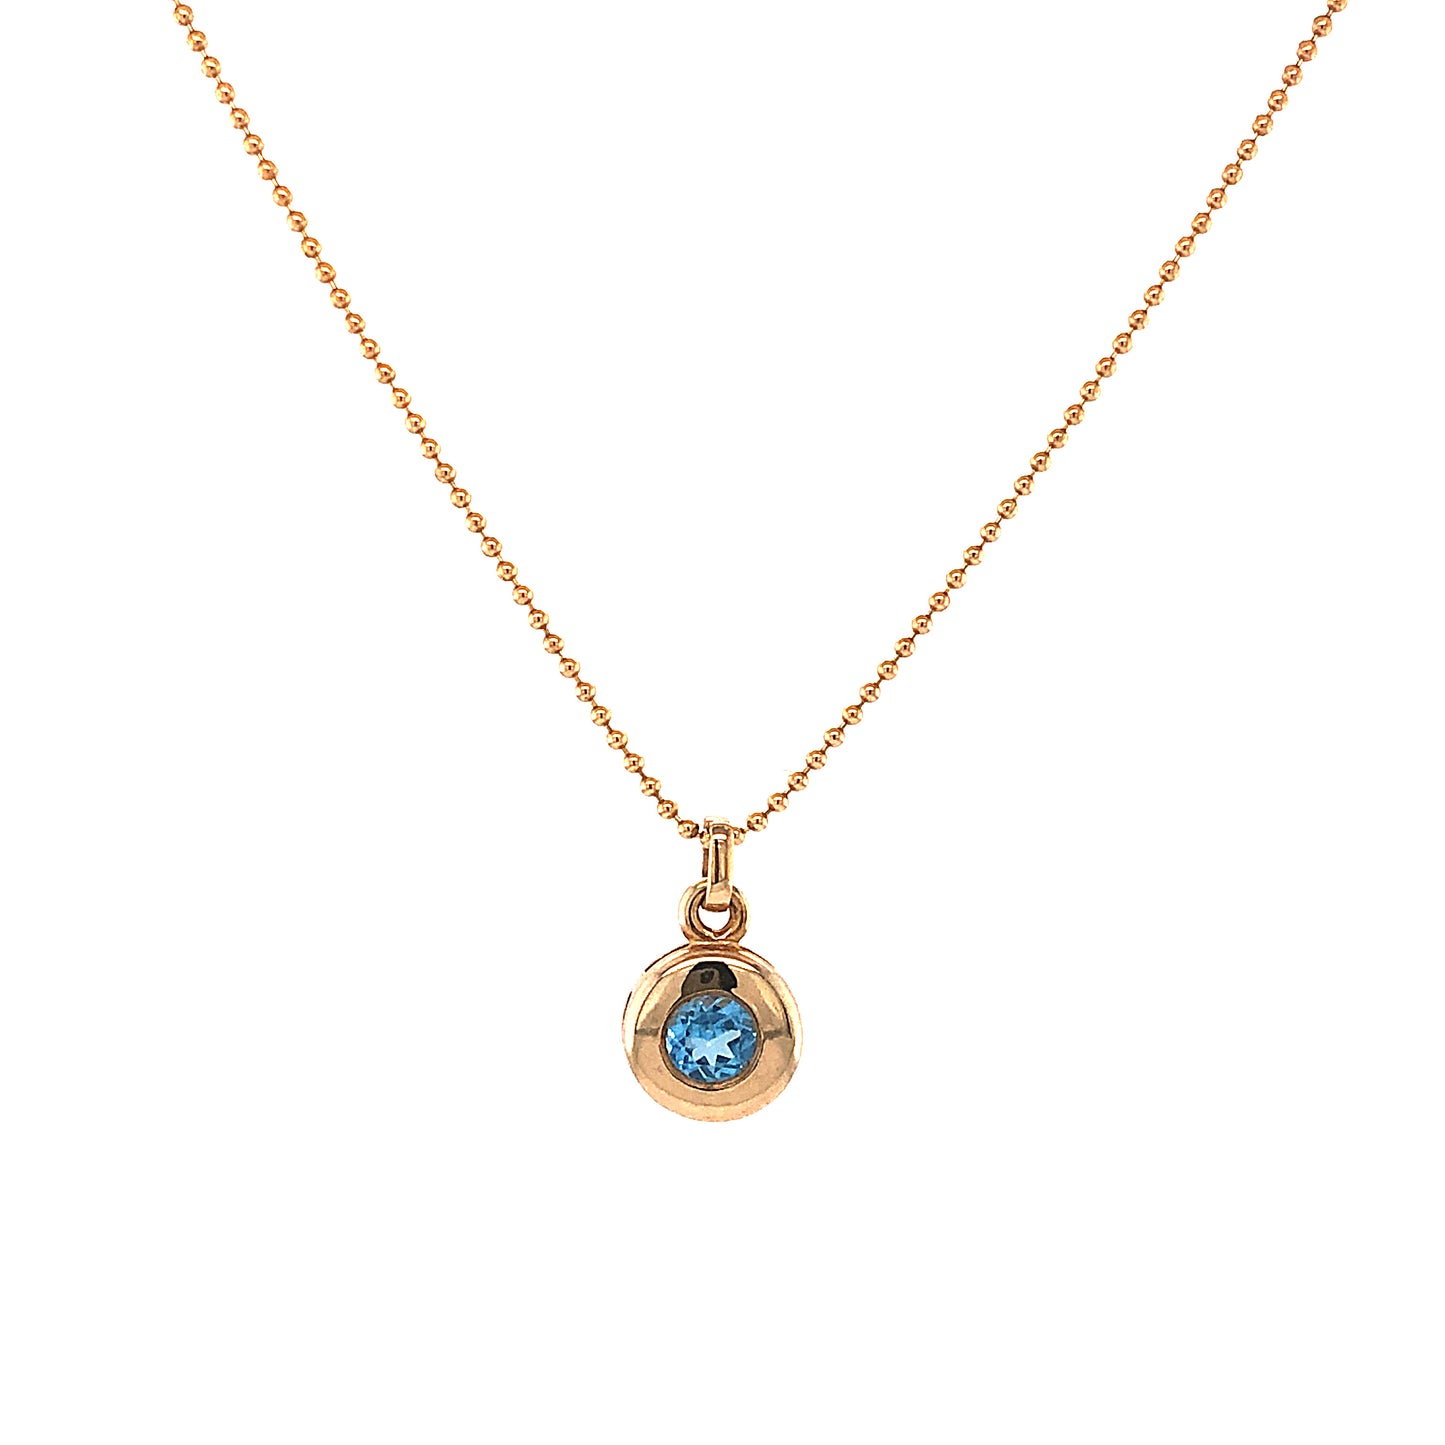 Round Blue Topaz Pendant Necklace in 14k Yellow Gold